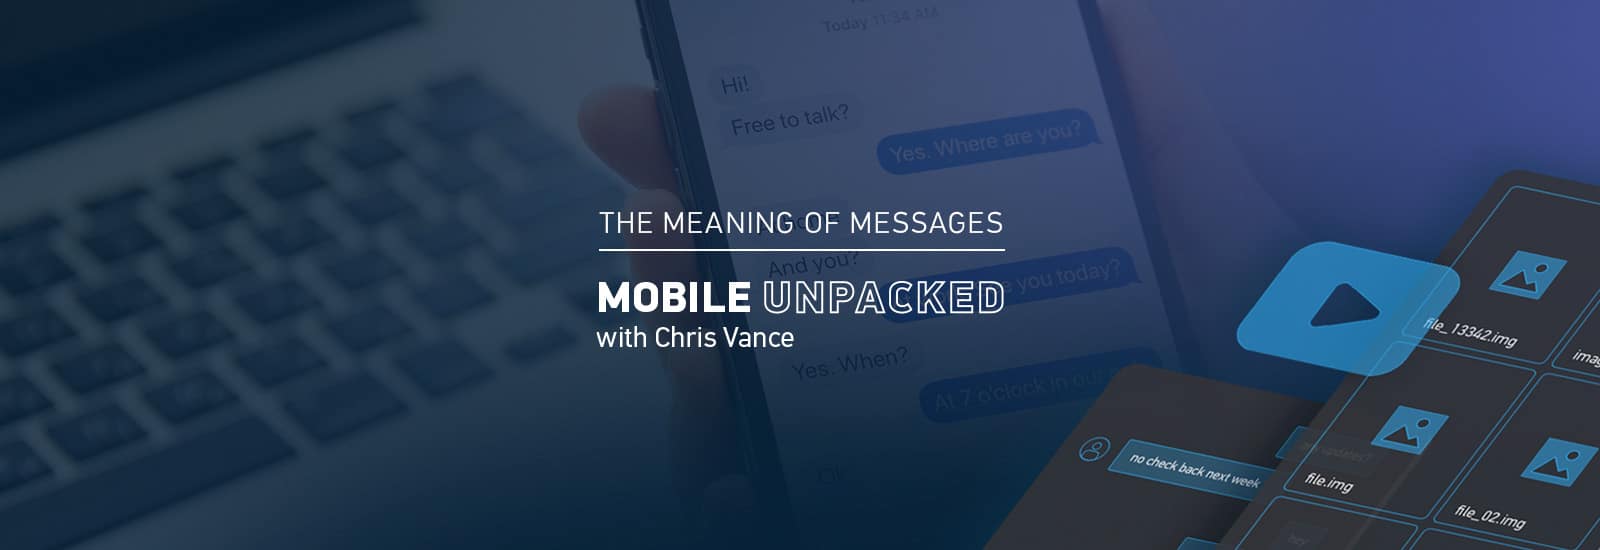 The Meaning of Messages